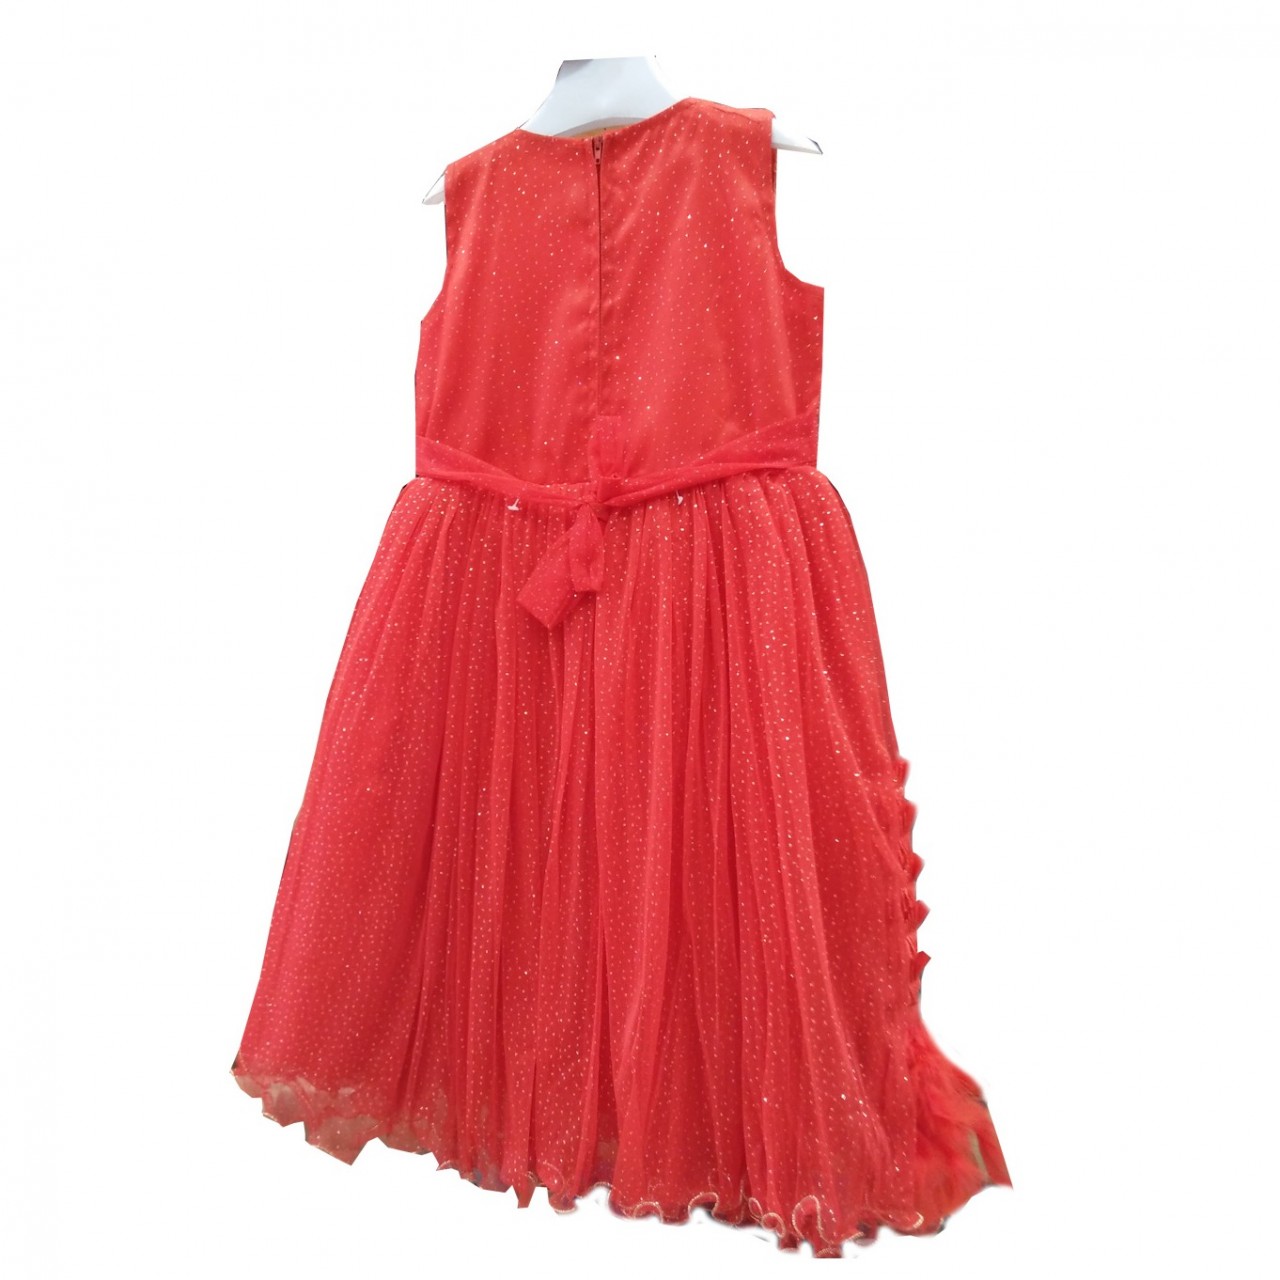 Beautiful Red Frock With Inner Tights For Little Girls - 4 To 7 Years